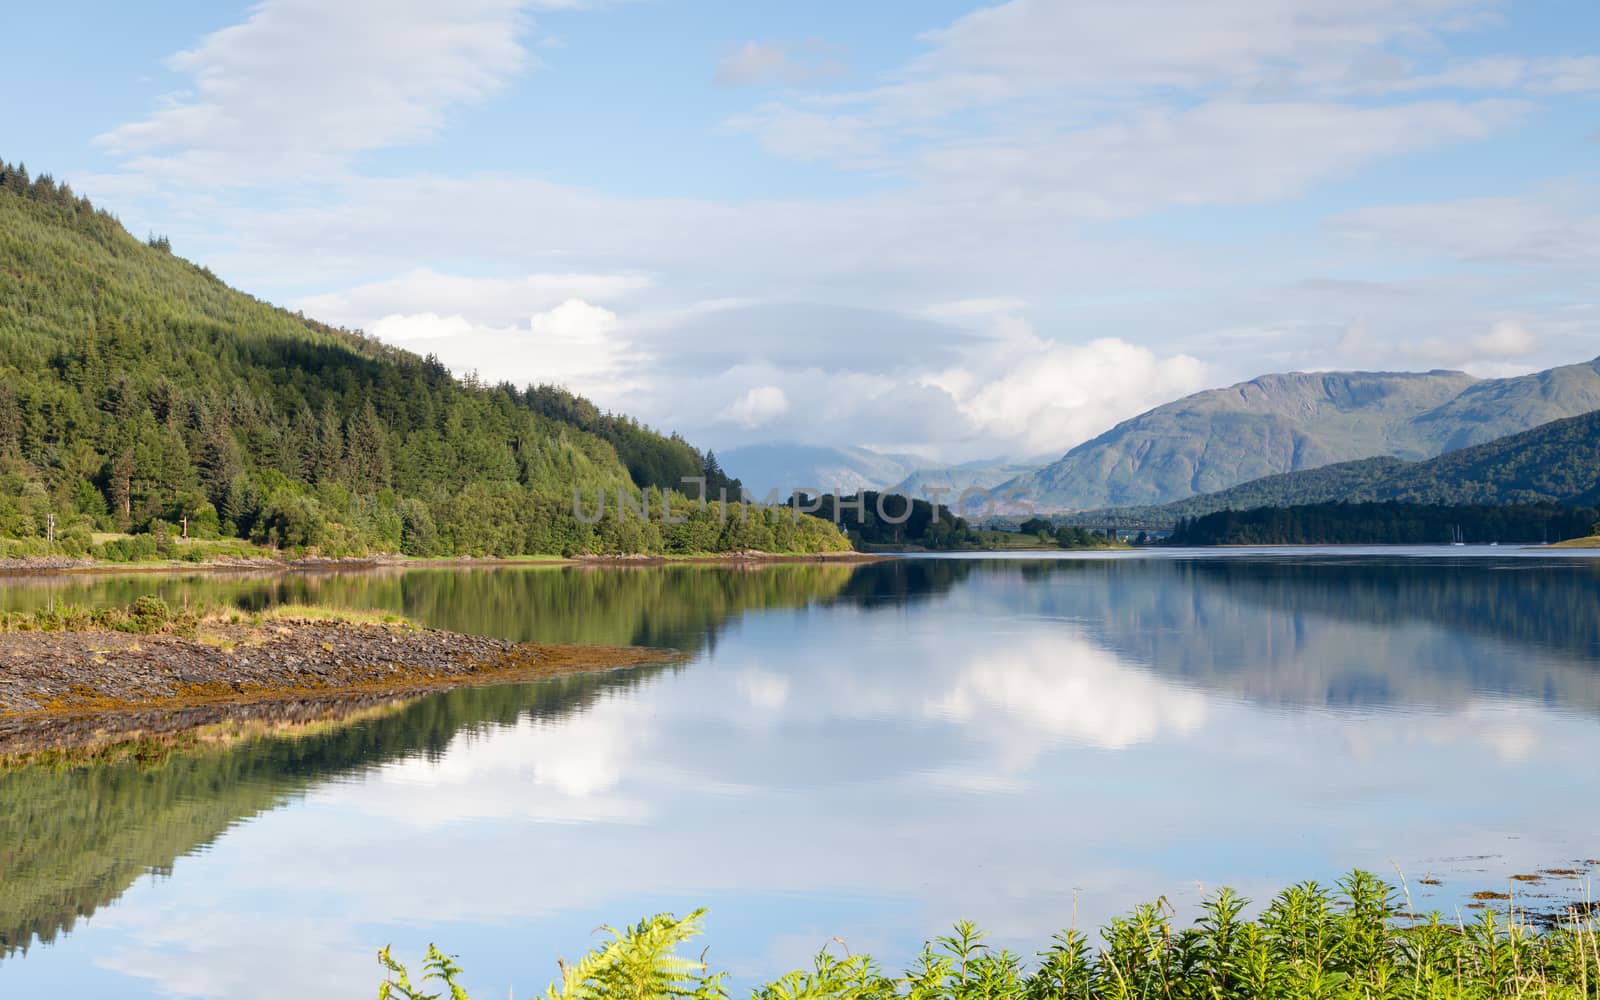 The view across Loch Leven from Ballachulish towards Ballachulish Bridge in the Scottish highlands.  Loch Leven is a sea loch on the west coast of Scotland.